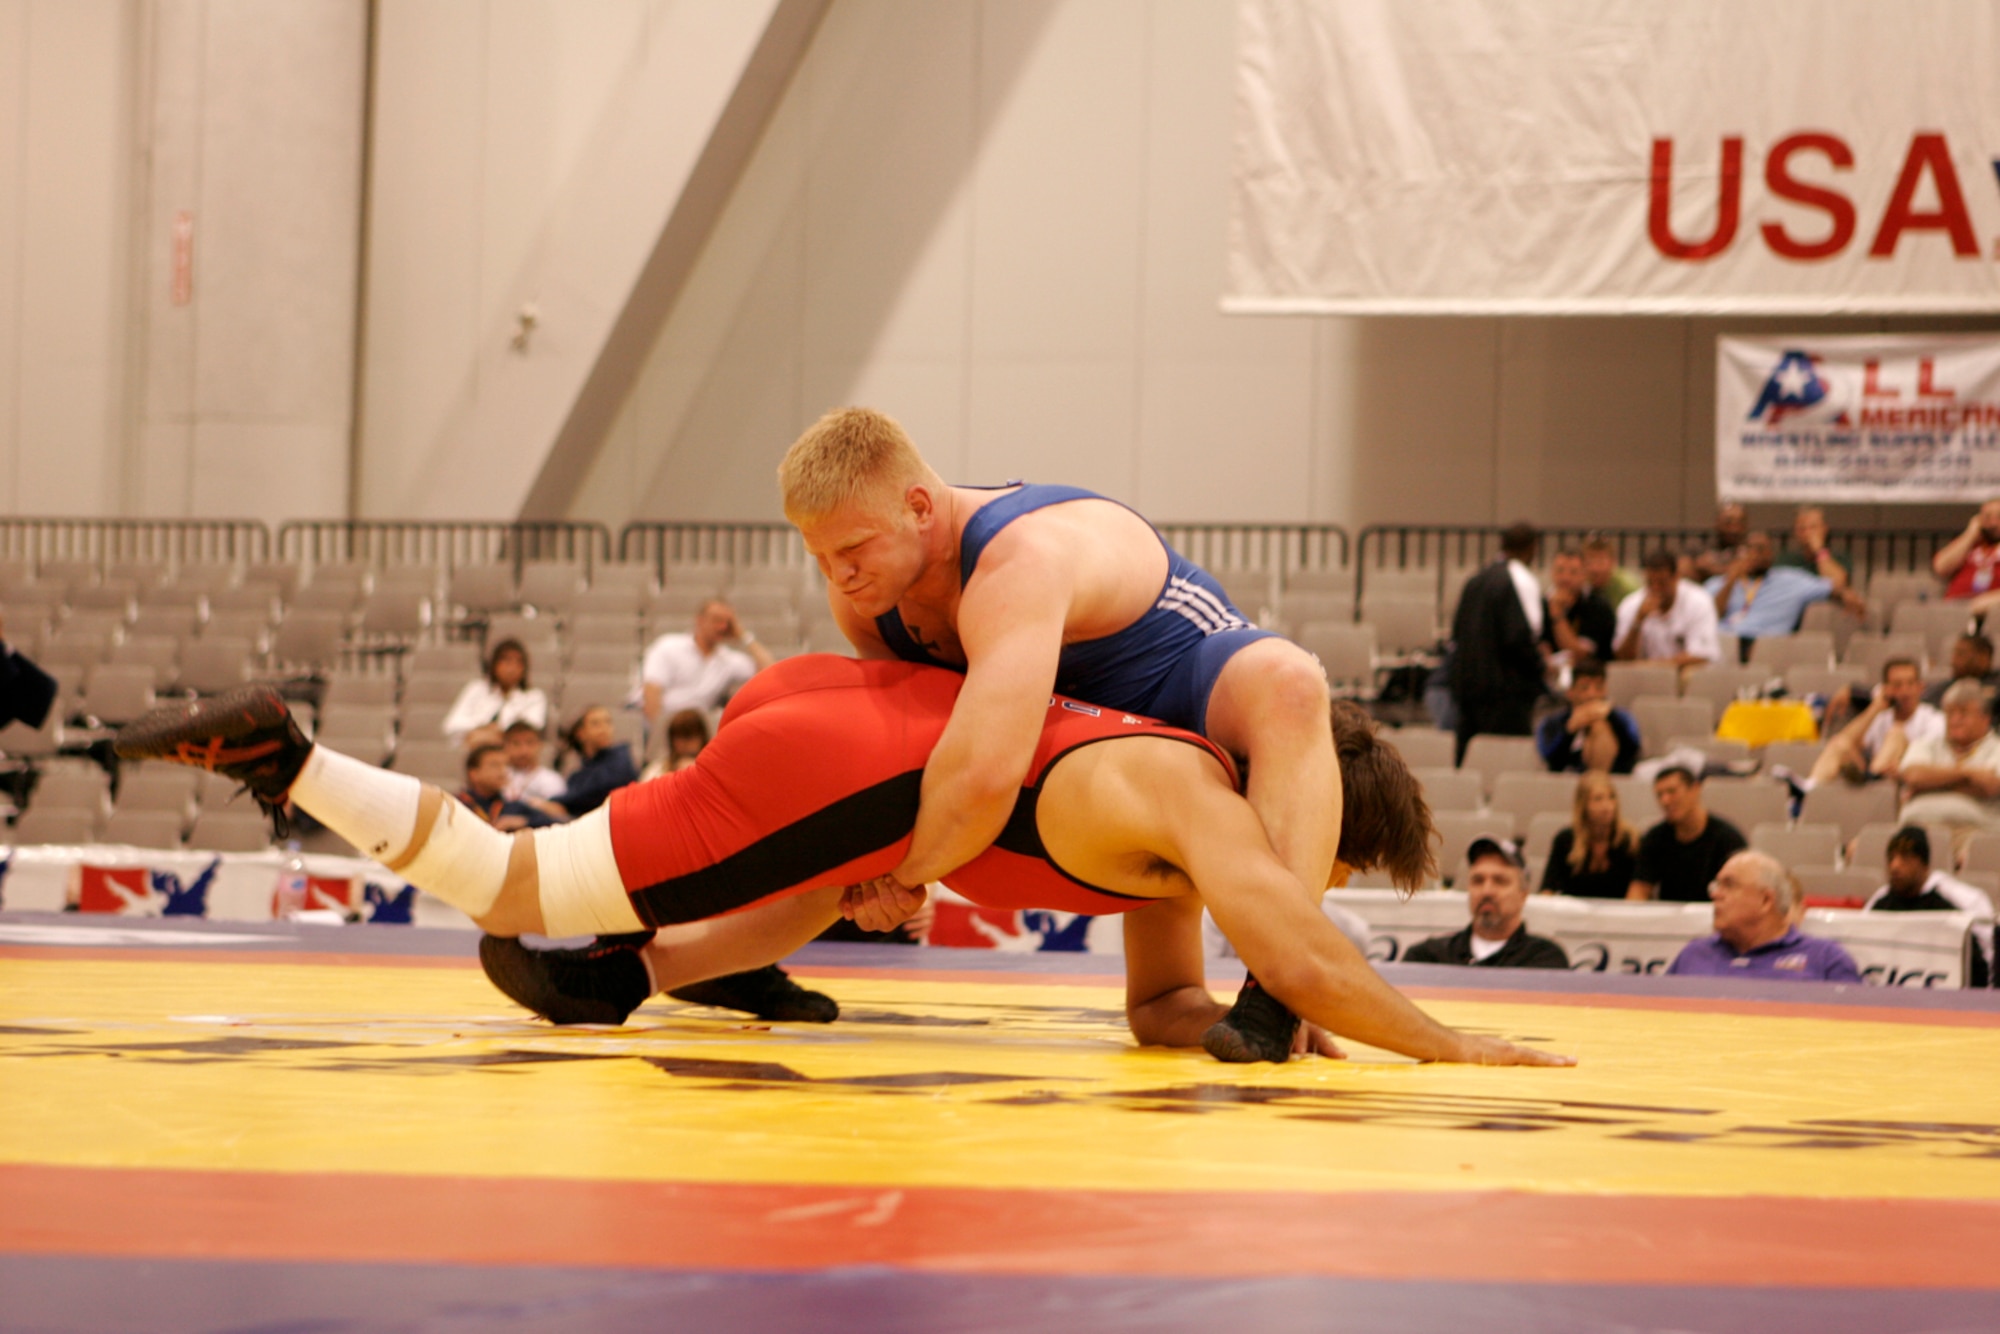 LAS VEGAS—Air Force wrestler Senior Airman Justin Millard (blue) secures his grip on Rob Smith, New York Athletic Club, during fifth-round competition of the senior men’s Greco tournament, 96 kilos, during the 2008 U.S. National Wrestling Championships April 25 at the Las Vegas Convention Center. Airman Millard placed 5th in his weight class, assisting the Air Force team in taking home three overall place wins. (U.S. Air Force photo/Staff Sgt. Jacob R. McCarthy)